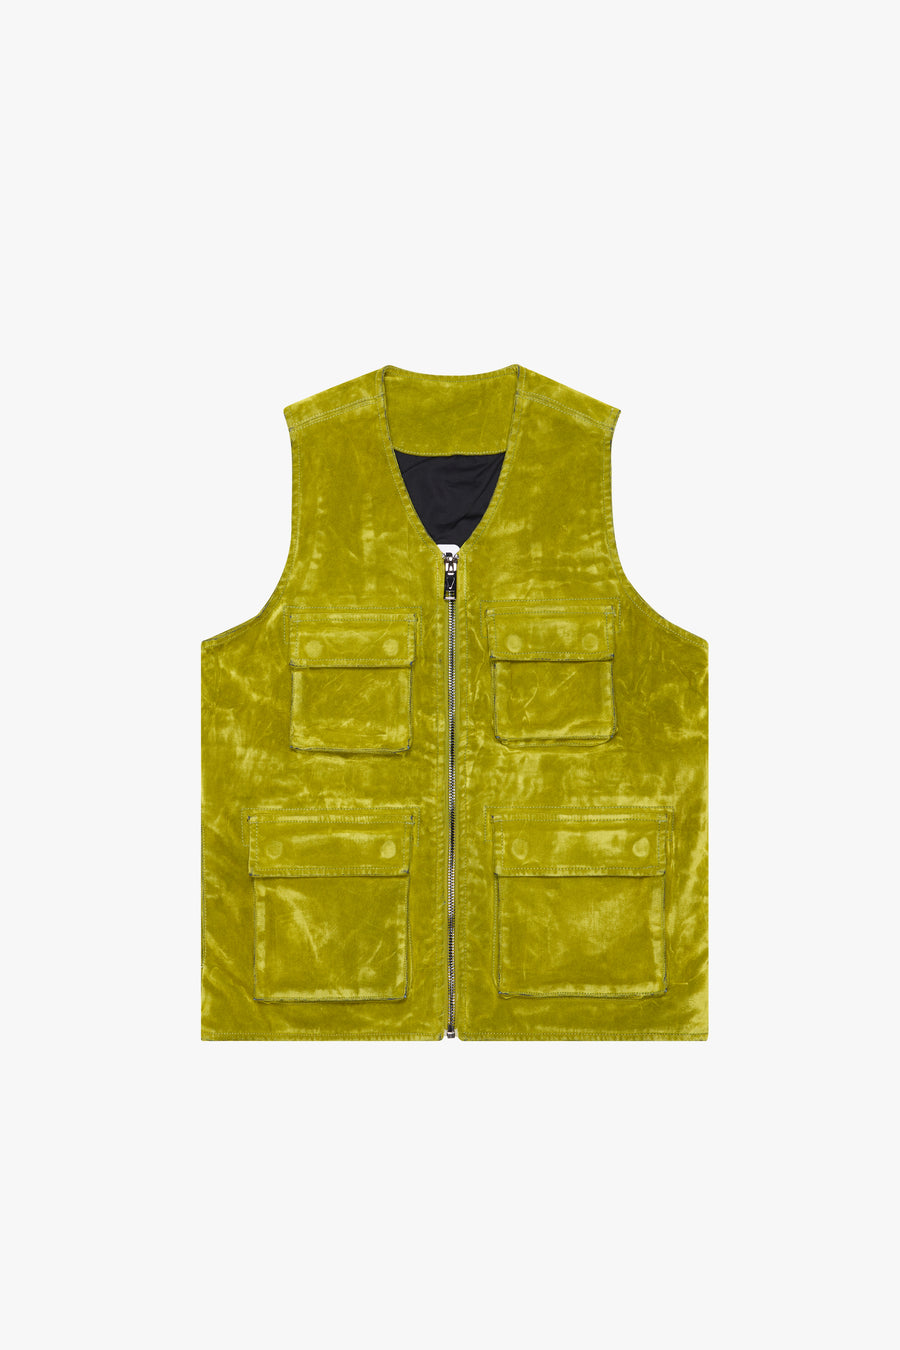 "CHARTREUSE" GREEN SUEDE VEST